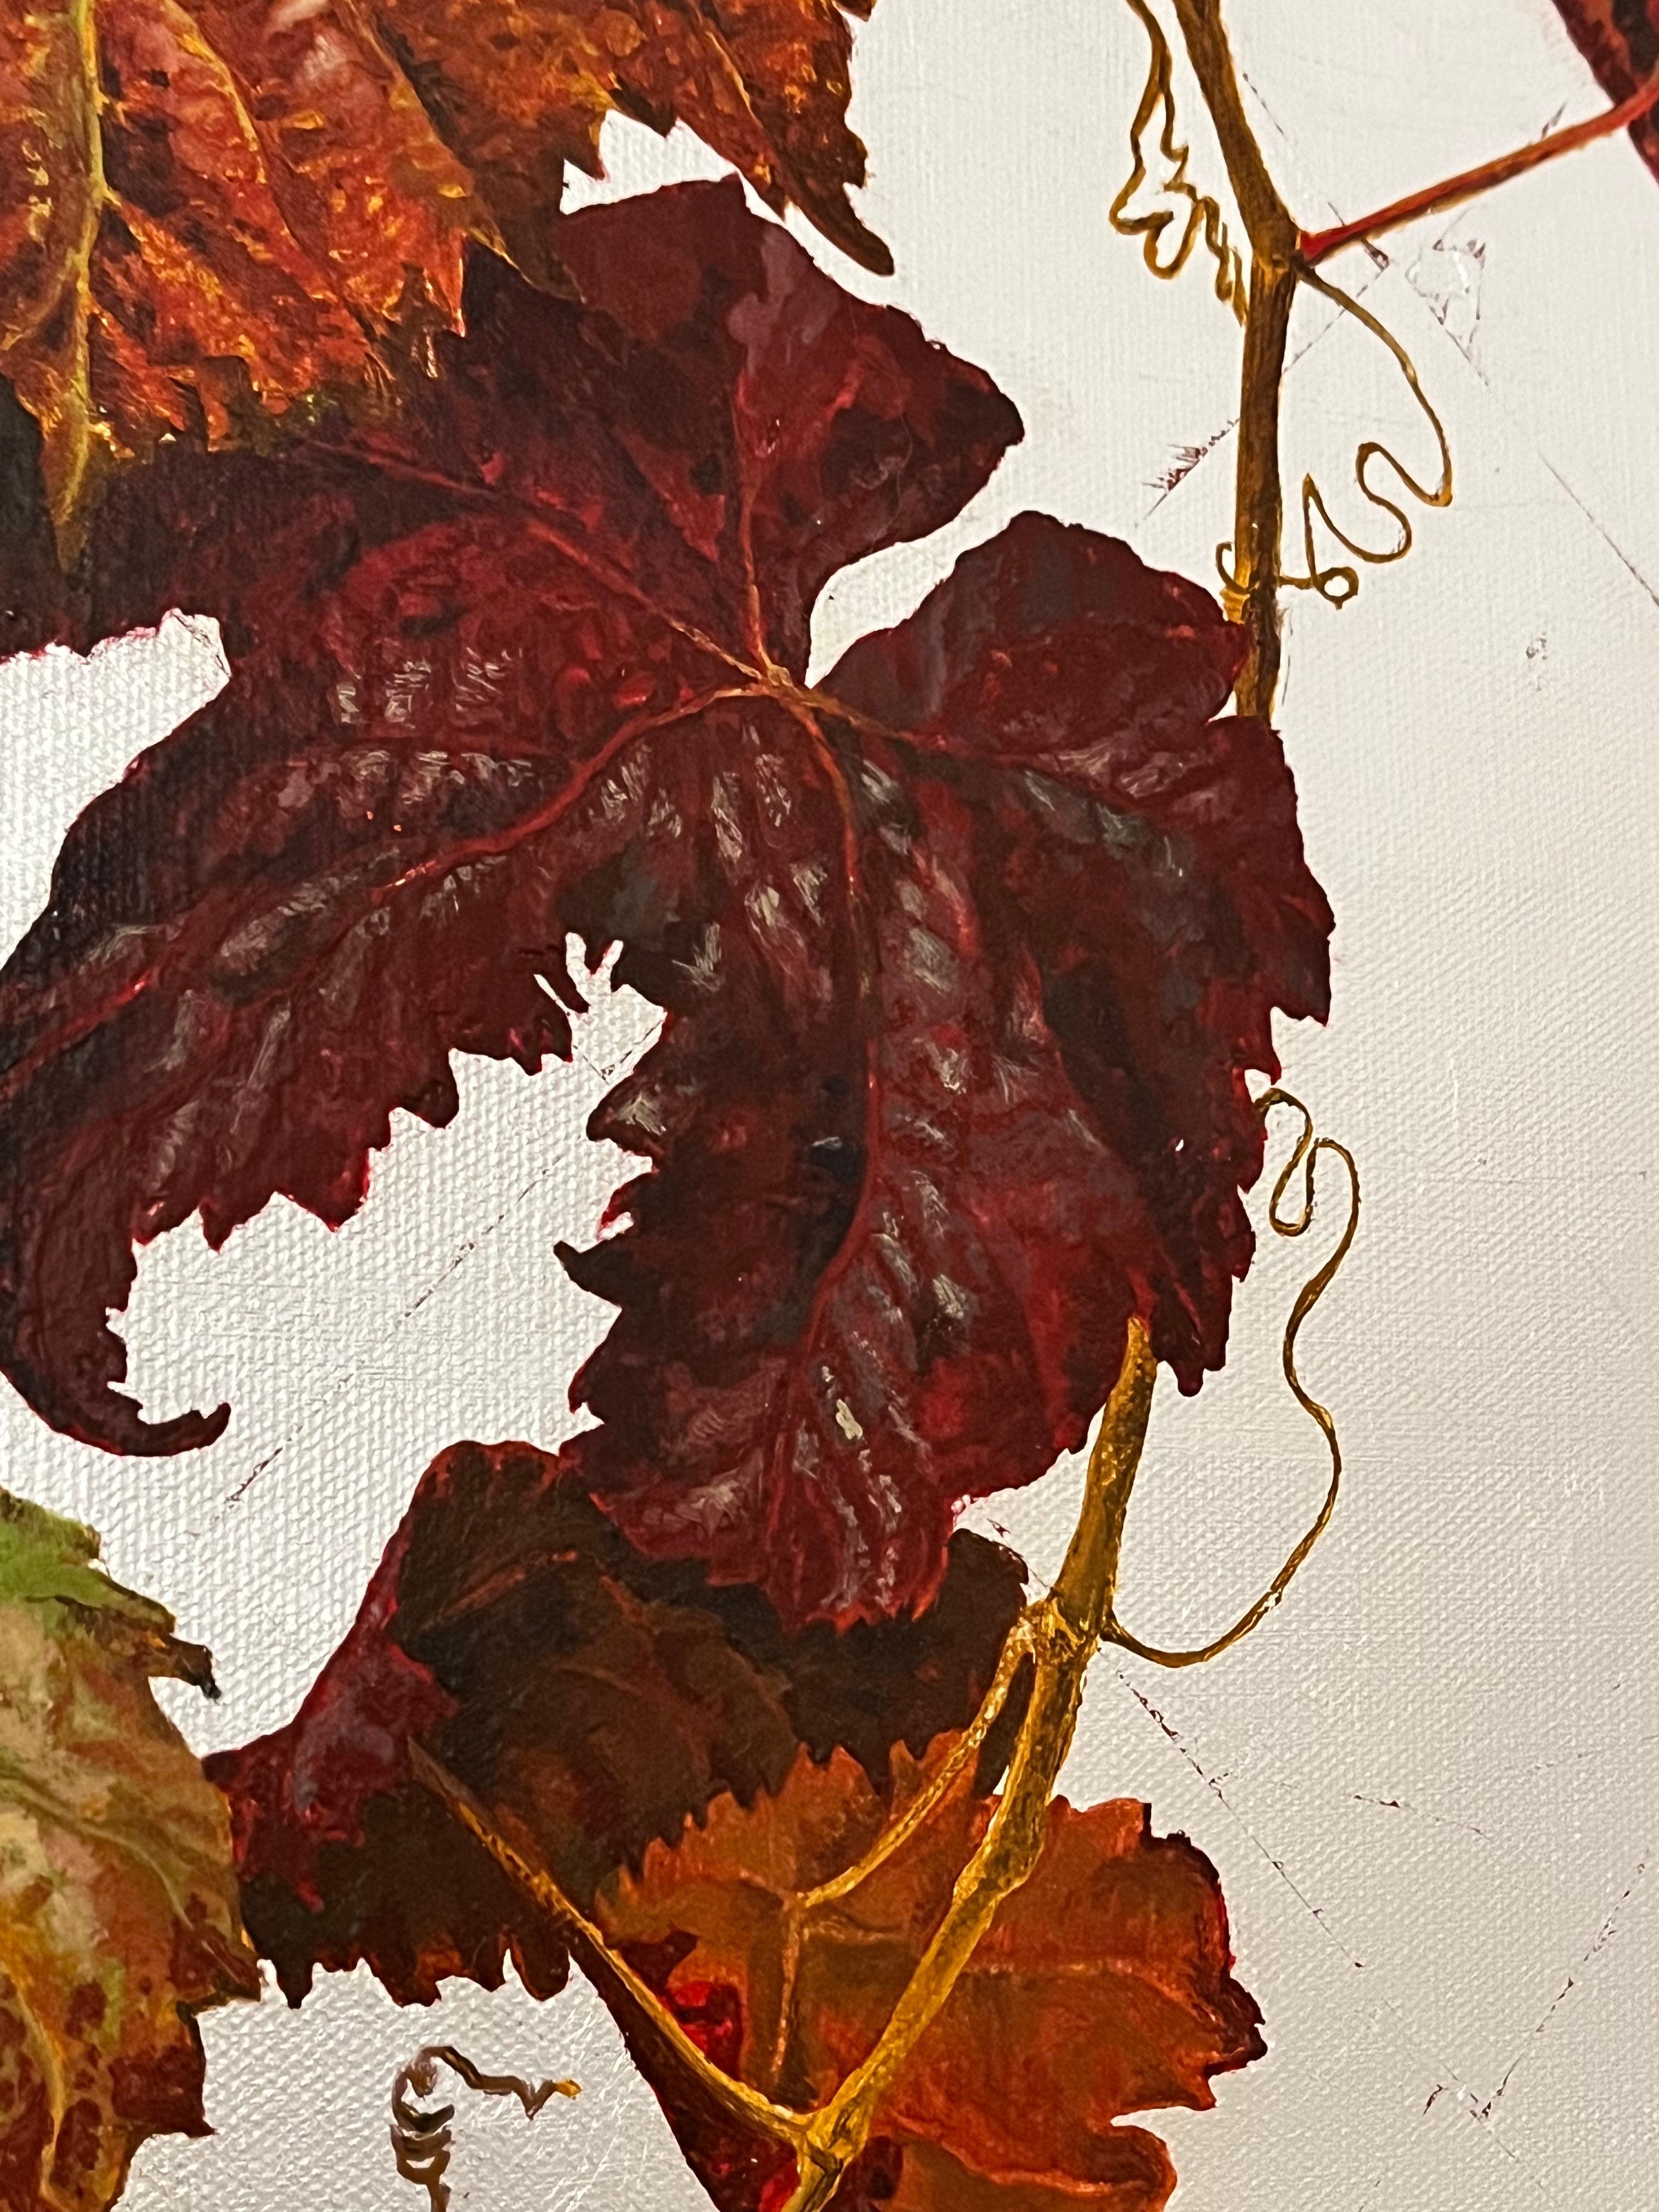 A vine shoot in warm autumn colours shows a ripe, purplish bunch against a silvery background. 

With elegance and great balance Margherita Leoni (b. 1974 Bergamo) weighs solids and voids, warm tones and cold tones, renewing the centuries-old